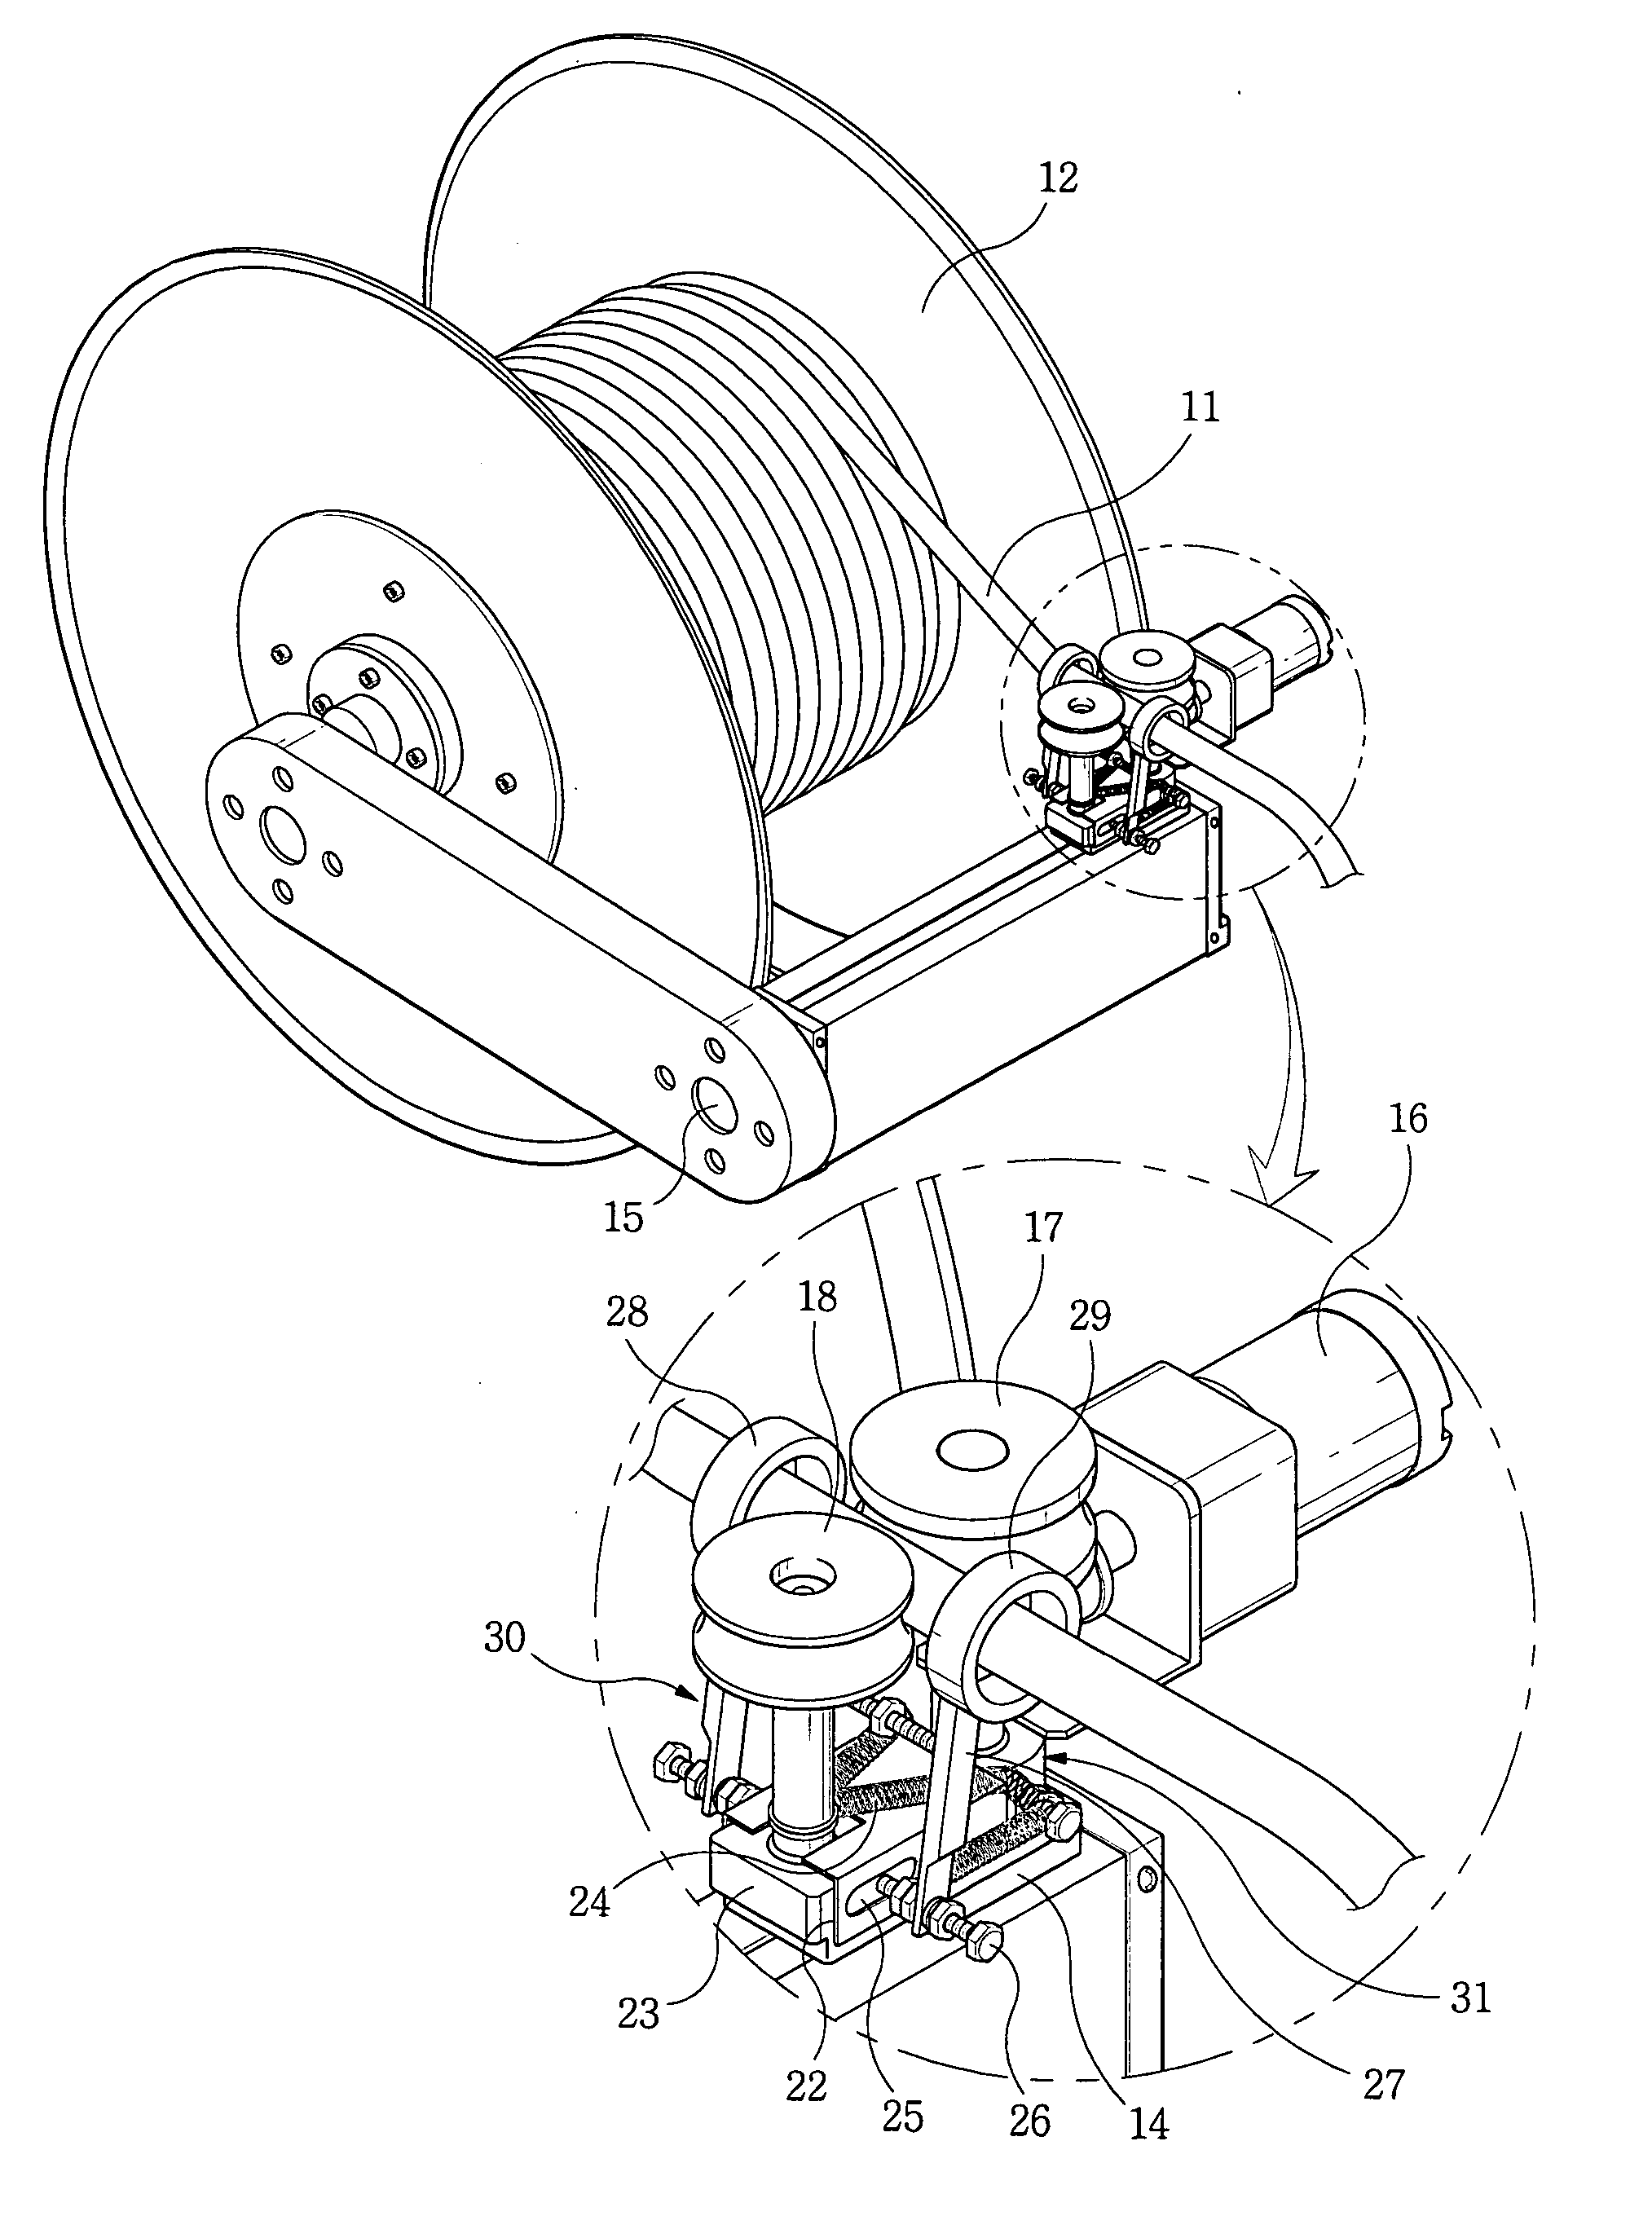 Labor reduction type agricultural chemical spraying system having automatic hose winding and unwinding apparatus